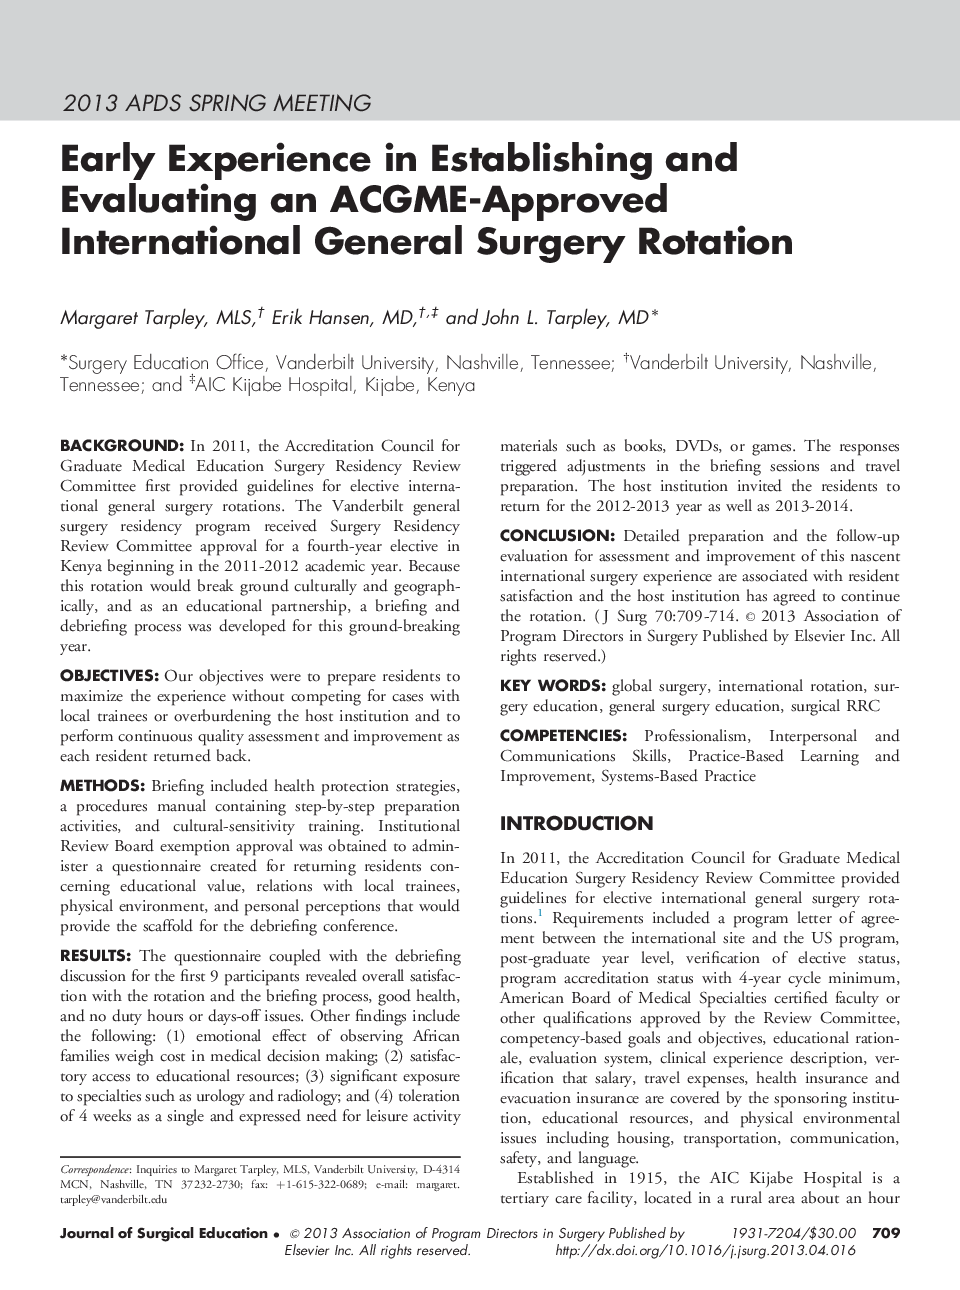 Early Experience in Establishing and Evaluating an ACGME-Approved International General Surgery Rotation